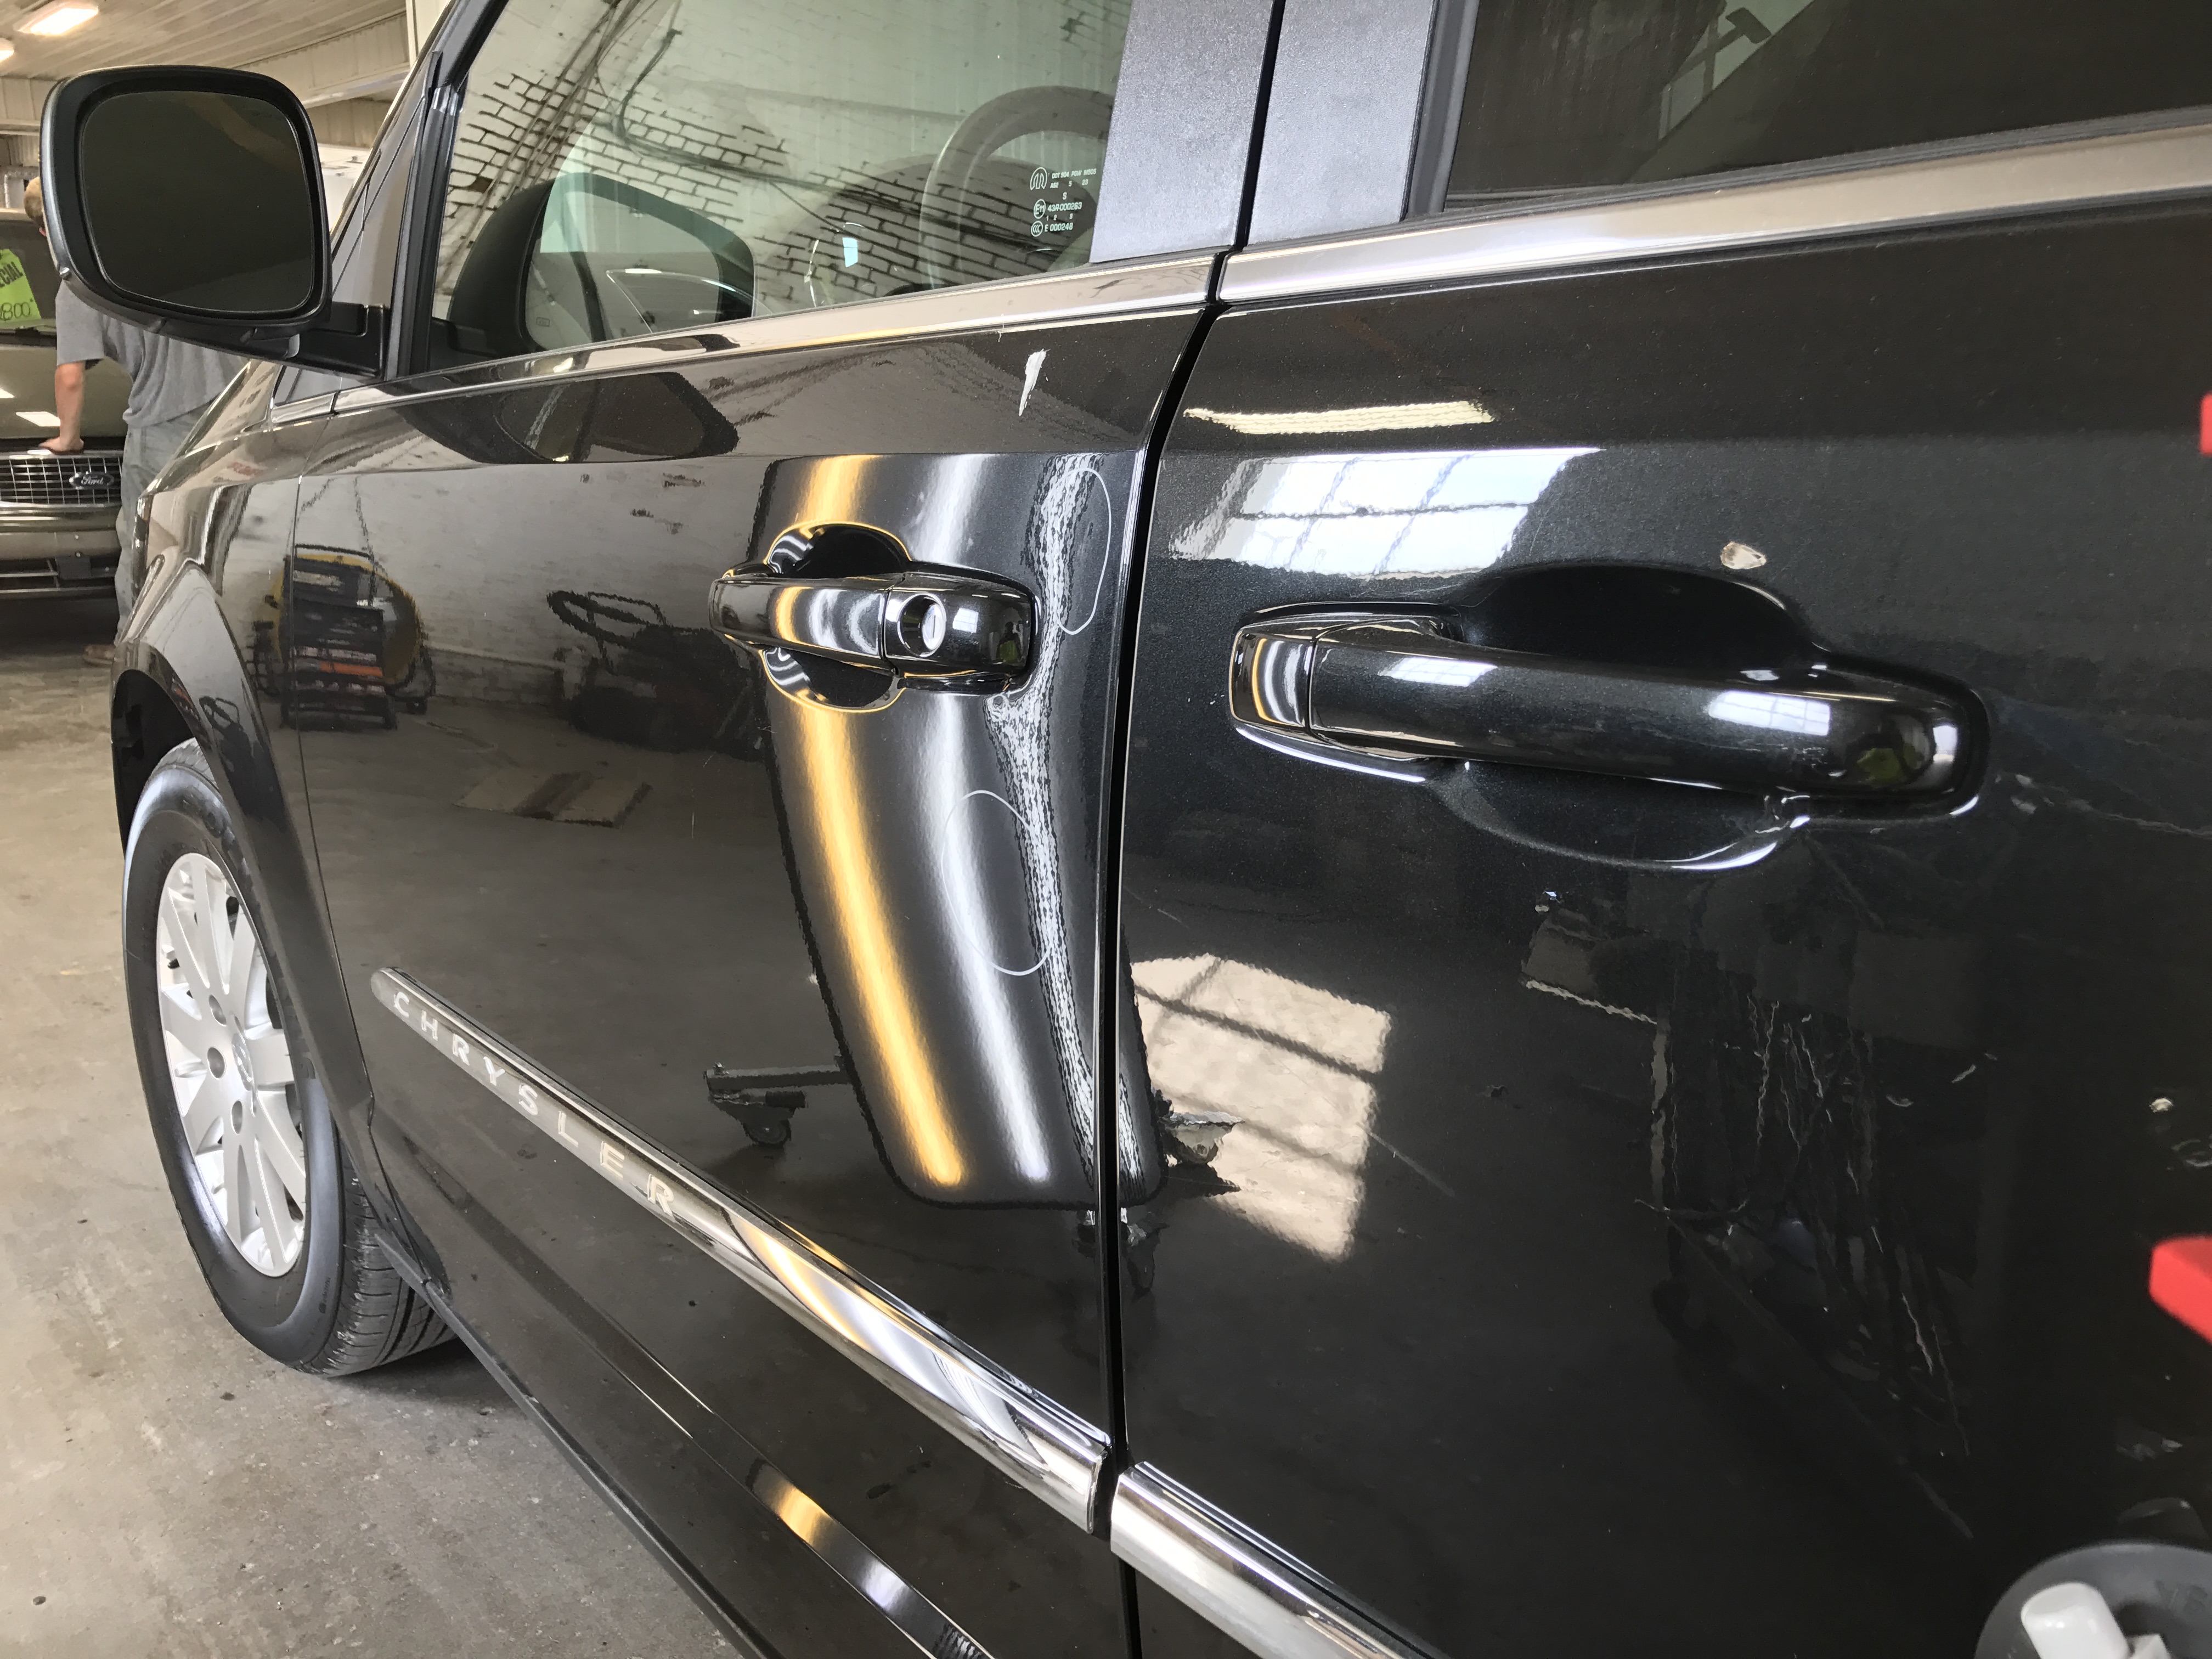 2016 Chrysler Town & Country Dents in Drivers door. Paintless dent repair, Springfield, IL, http://217dent.com